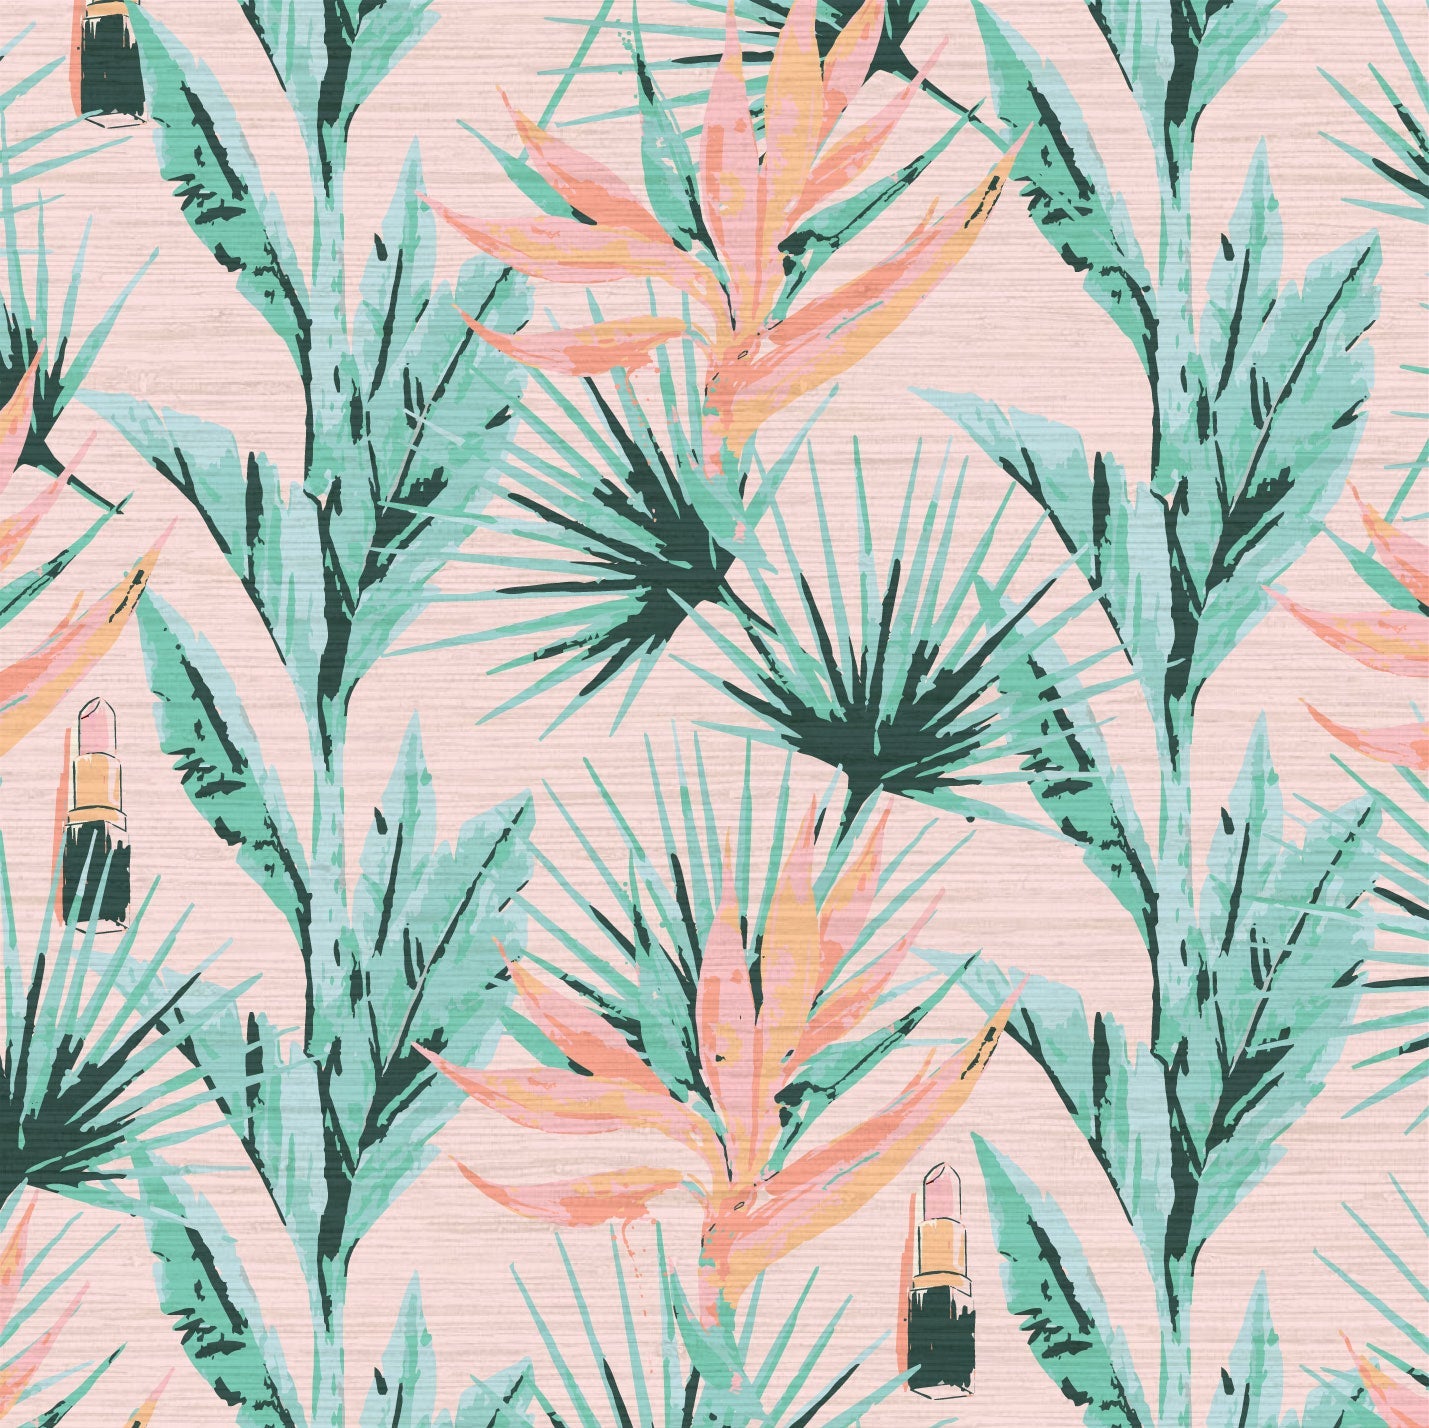 Load image into Gallery viewer, printed grasscloth wallpaper light pink based allover floral print with light pink and orange birds of paradise floral paired with shades of green palm leaves with added light pink lipstick tubes scattered throughout the print. Natural Textured Eco-Friendly Non-toxic High-quality Sustainable practices Sustainability Interior Design botanical medspa beauty salon custom wall cover garden
